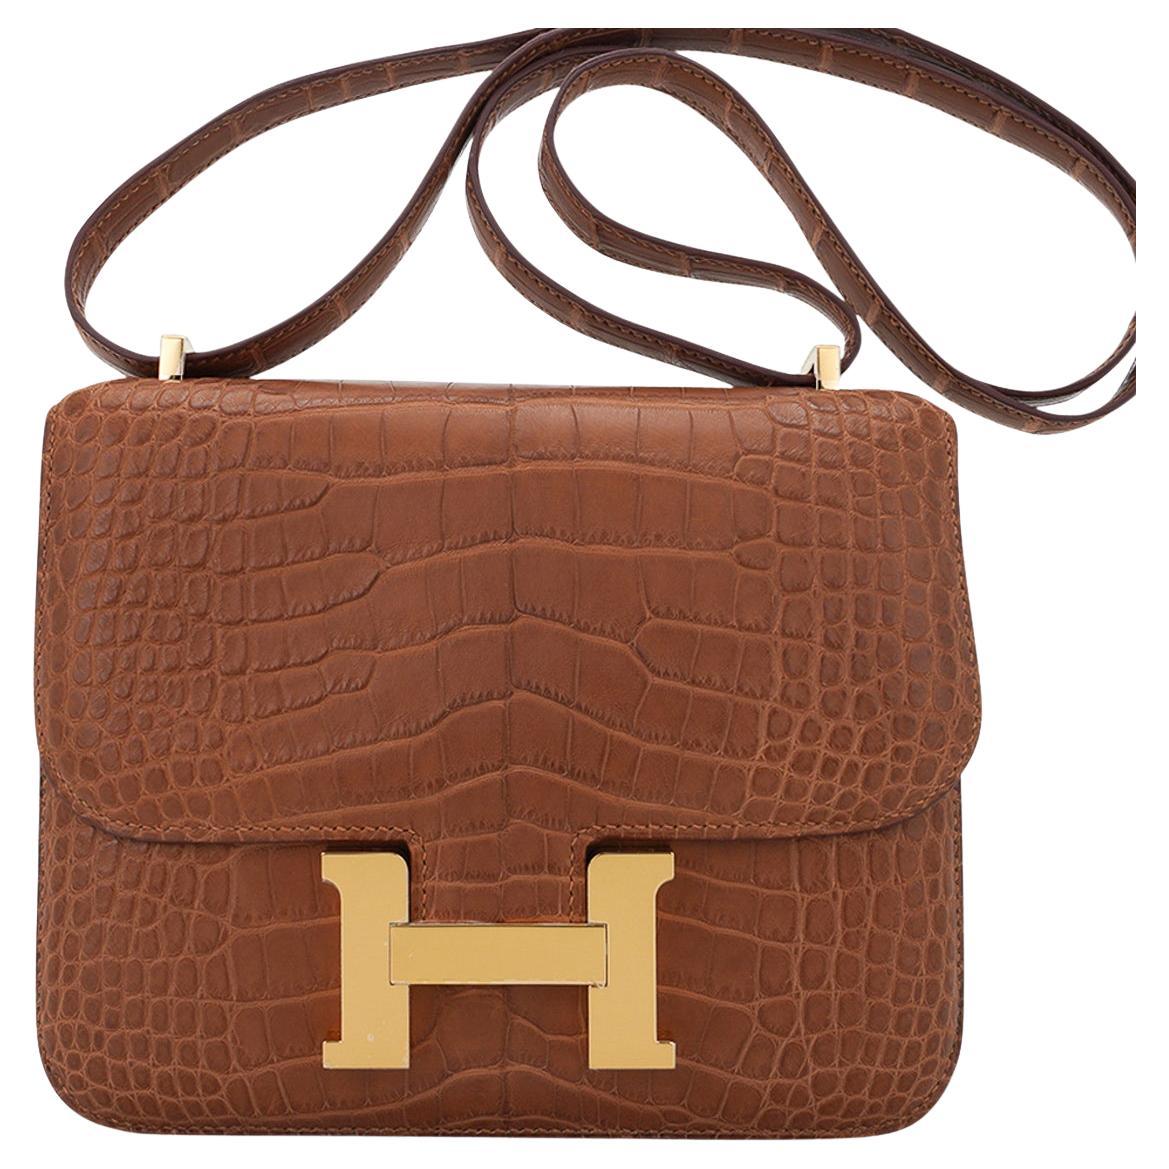 Sold at Auction: AUTHENTIC HERMES CONSTANCE OSTRICH LEATHER